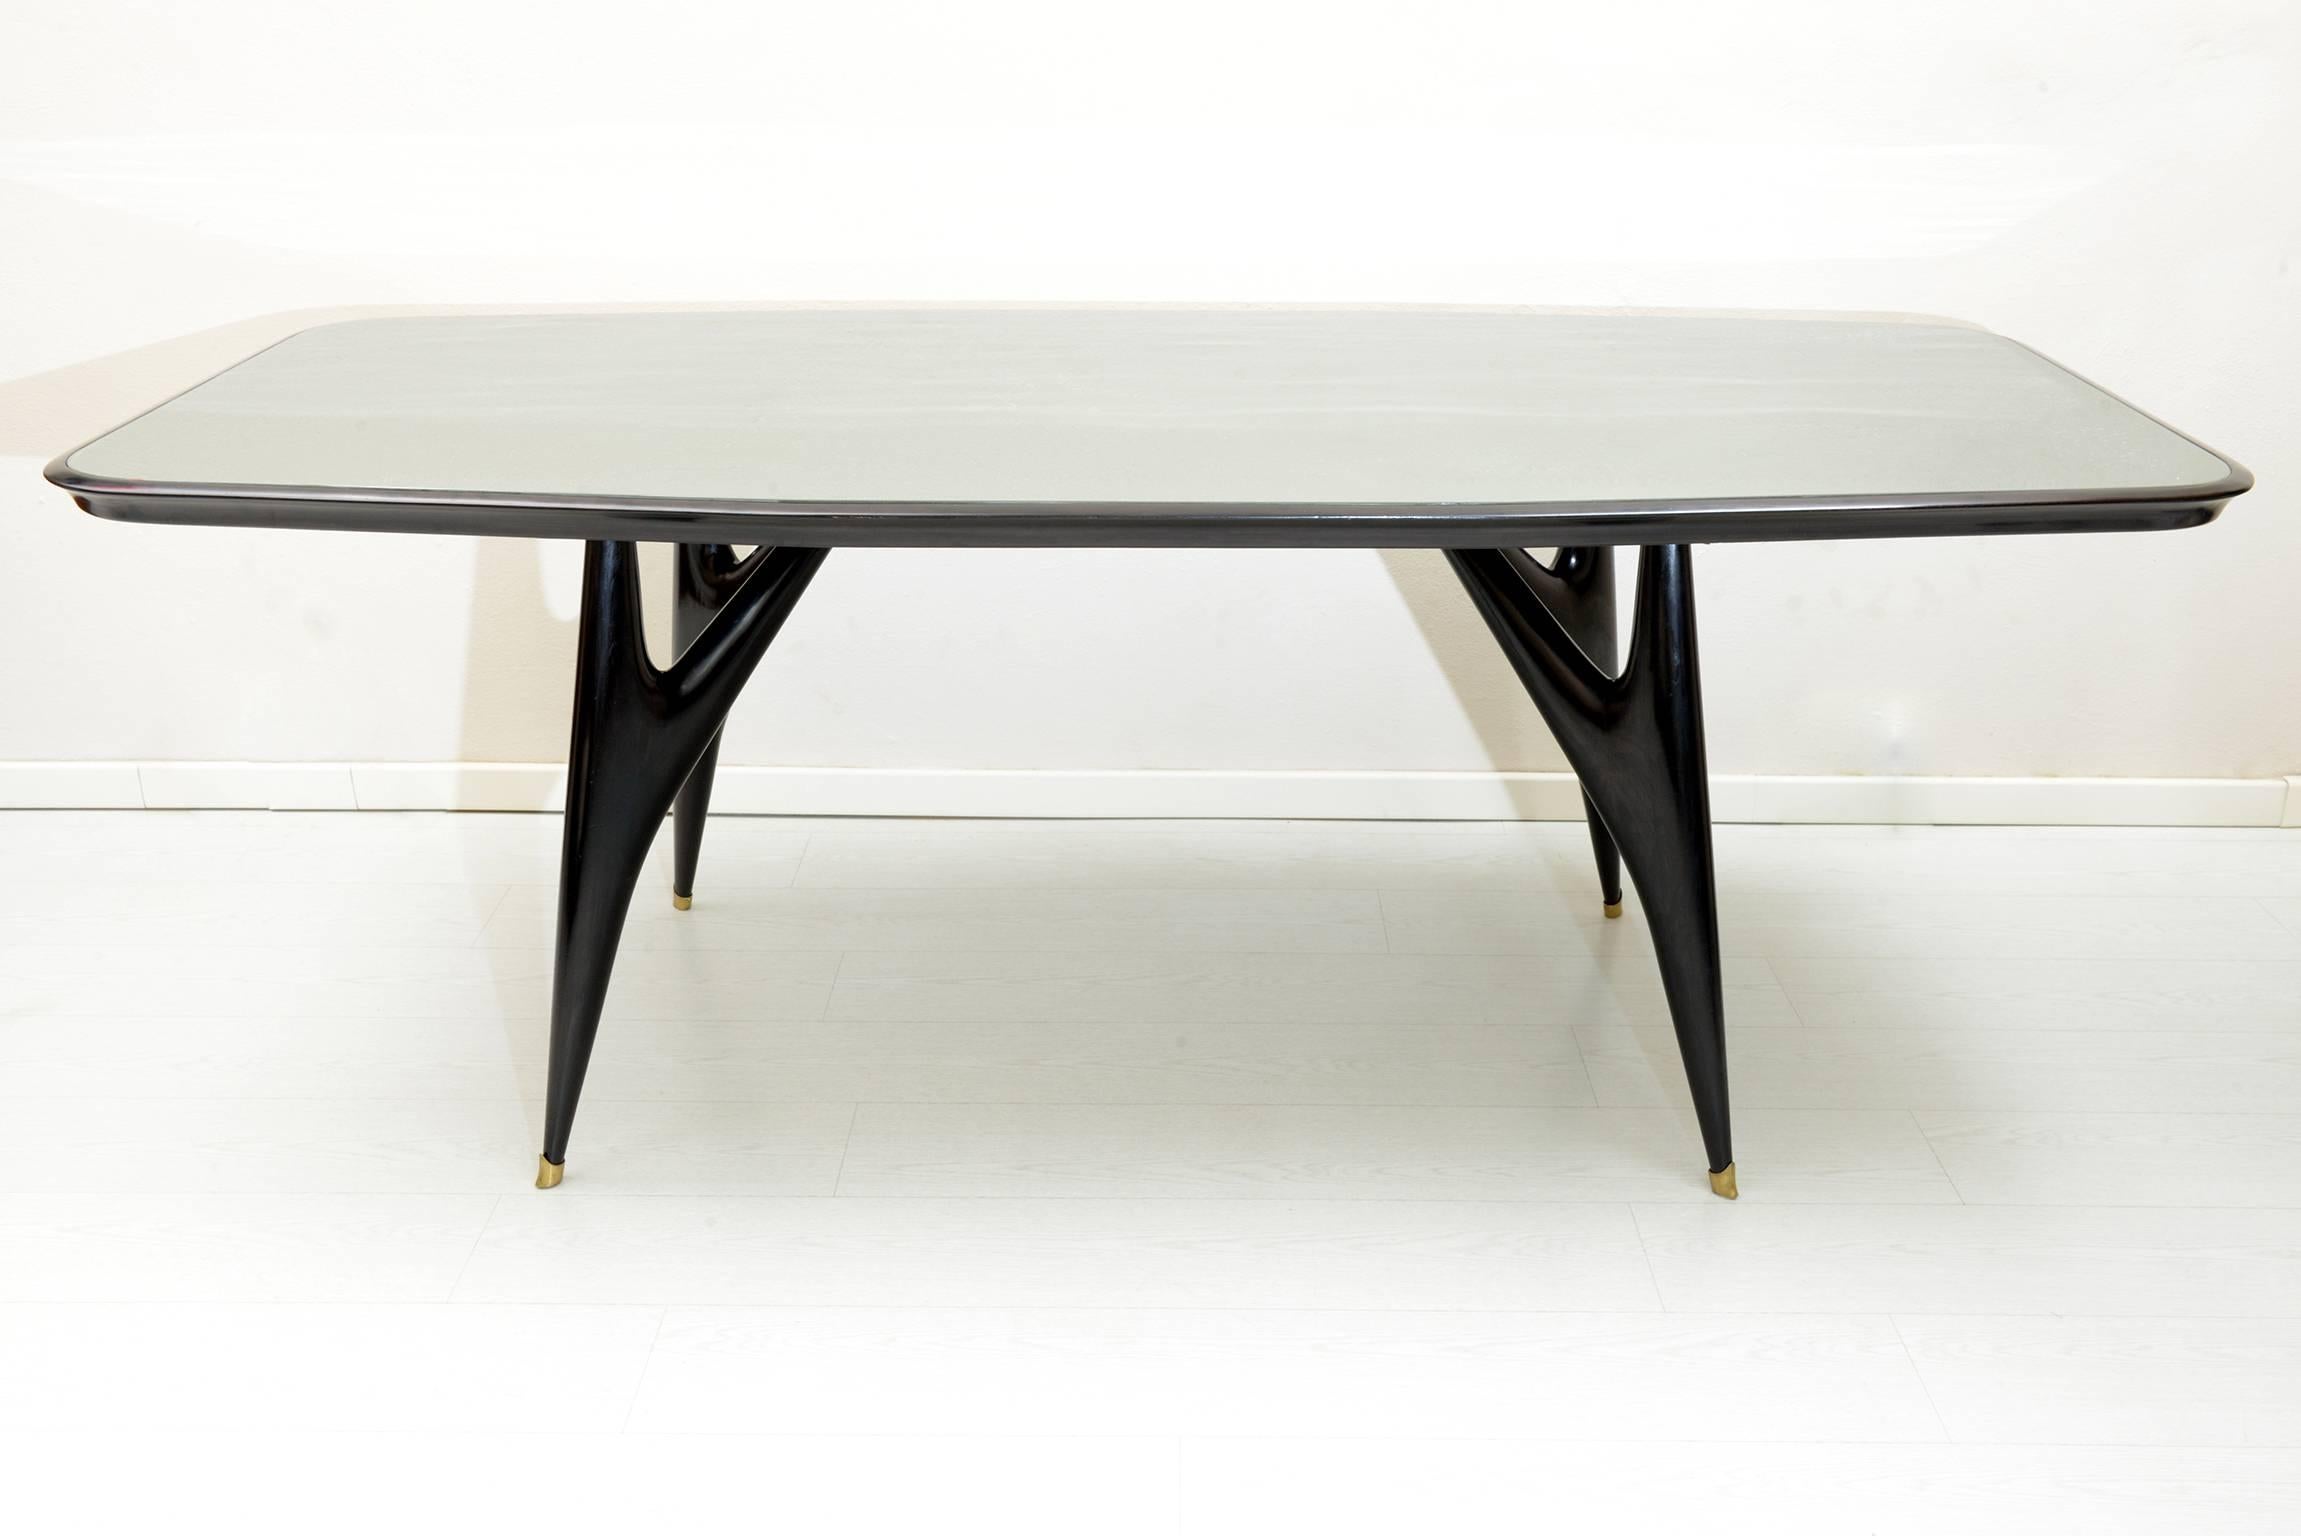 Four slender black laquered solid wood sculptured legs with brass feet details.
Glass encased octagonal top.